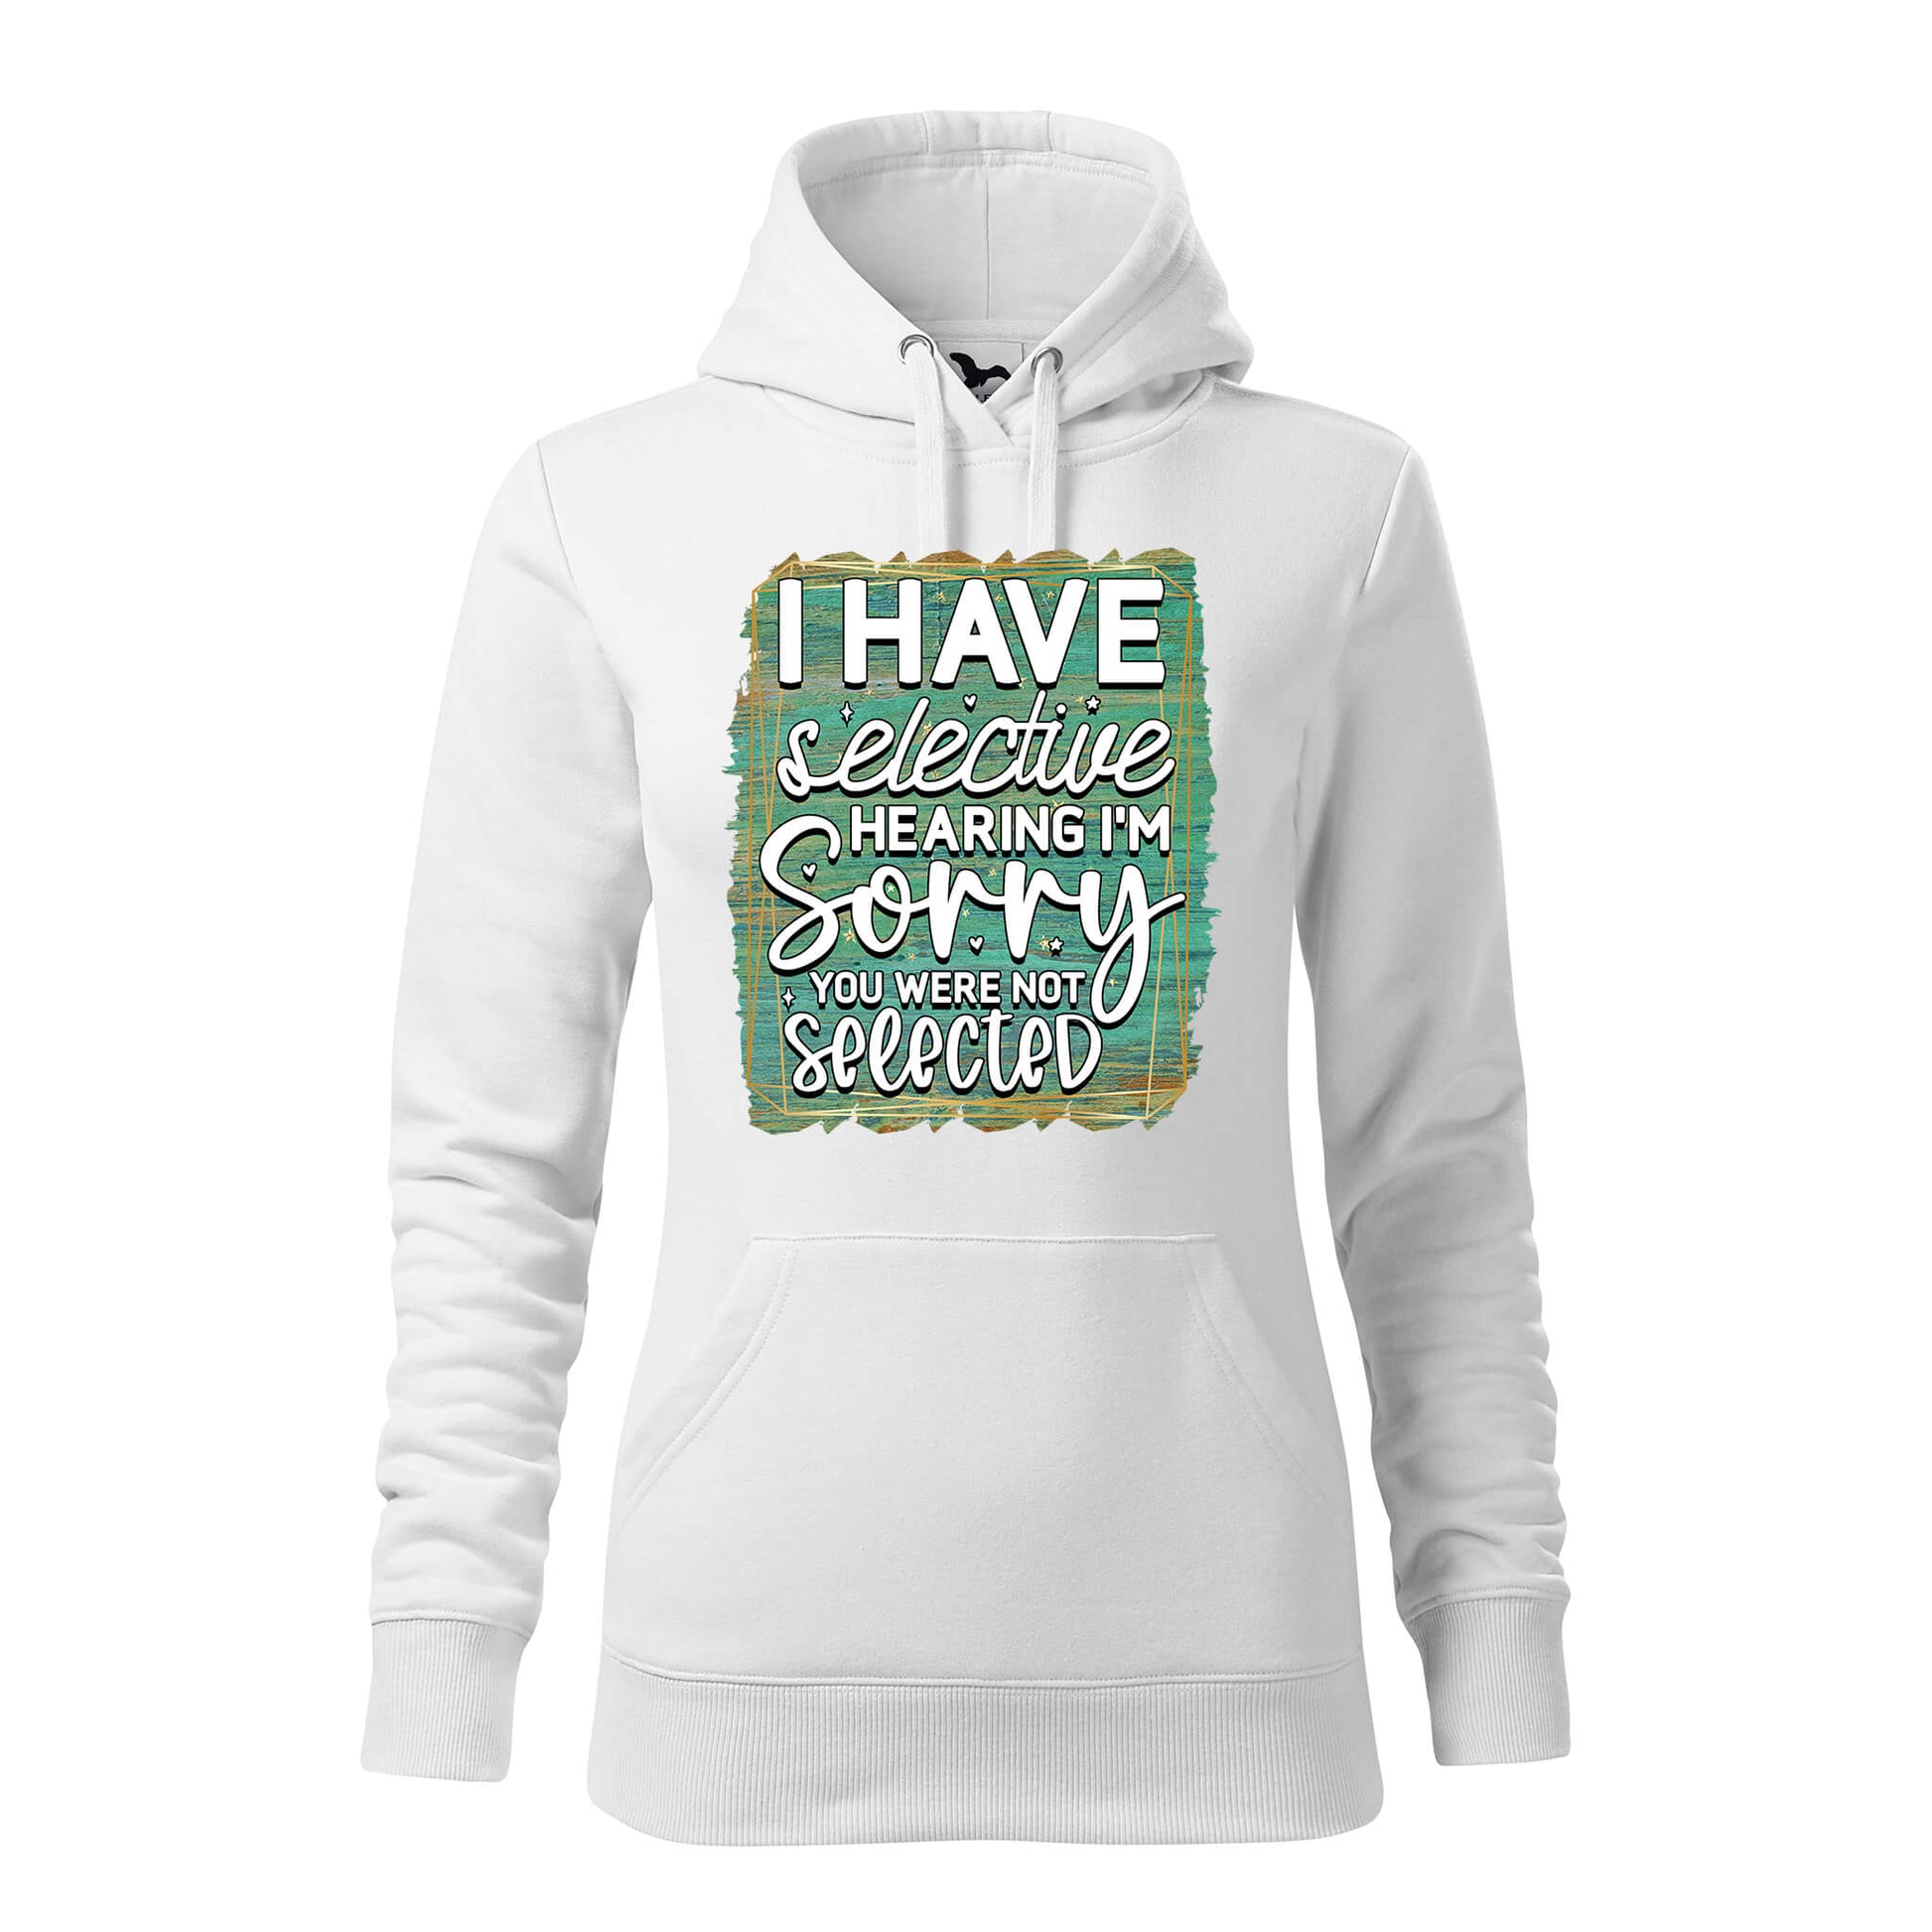 I have selective hearing hoodie - rvdesignprint